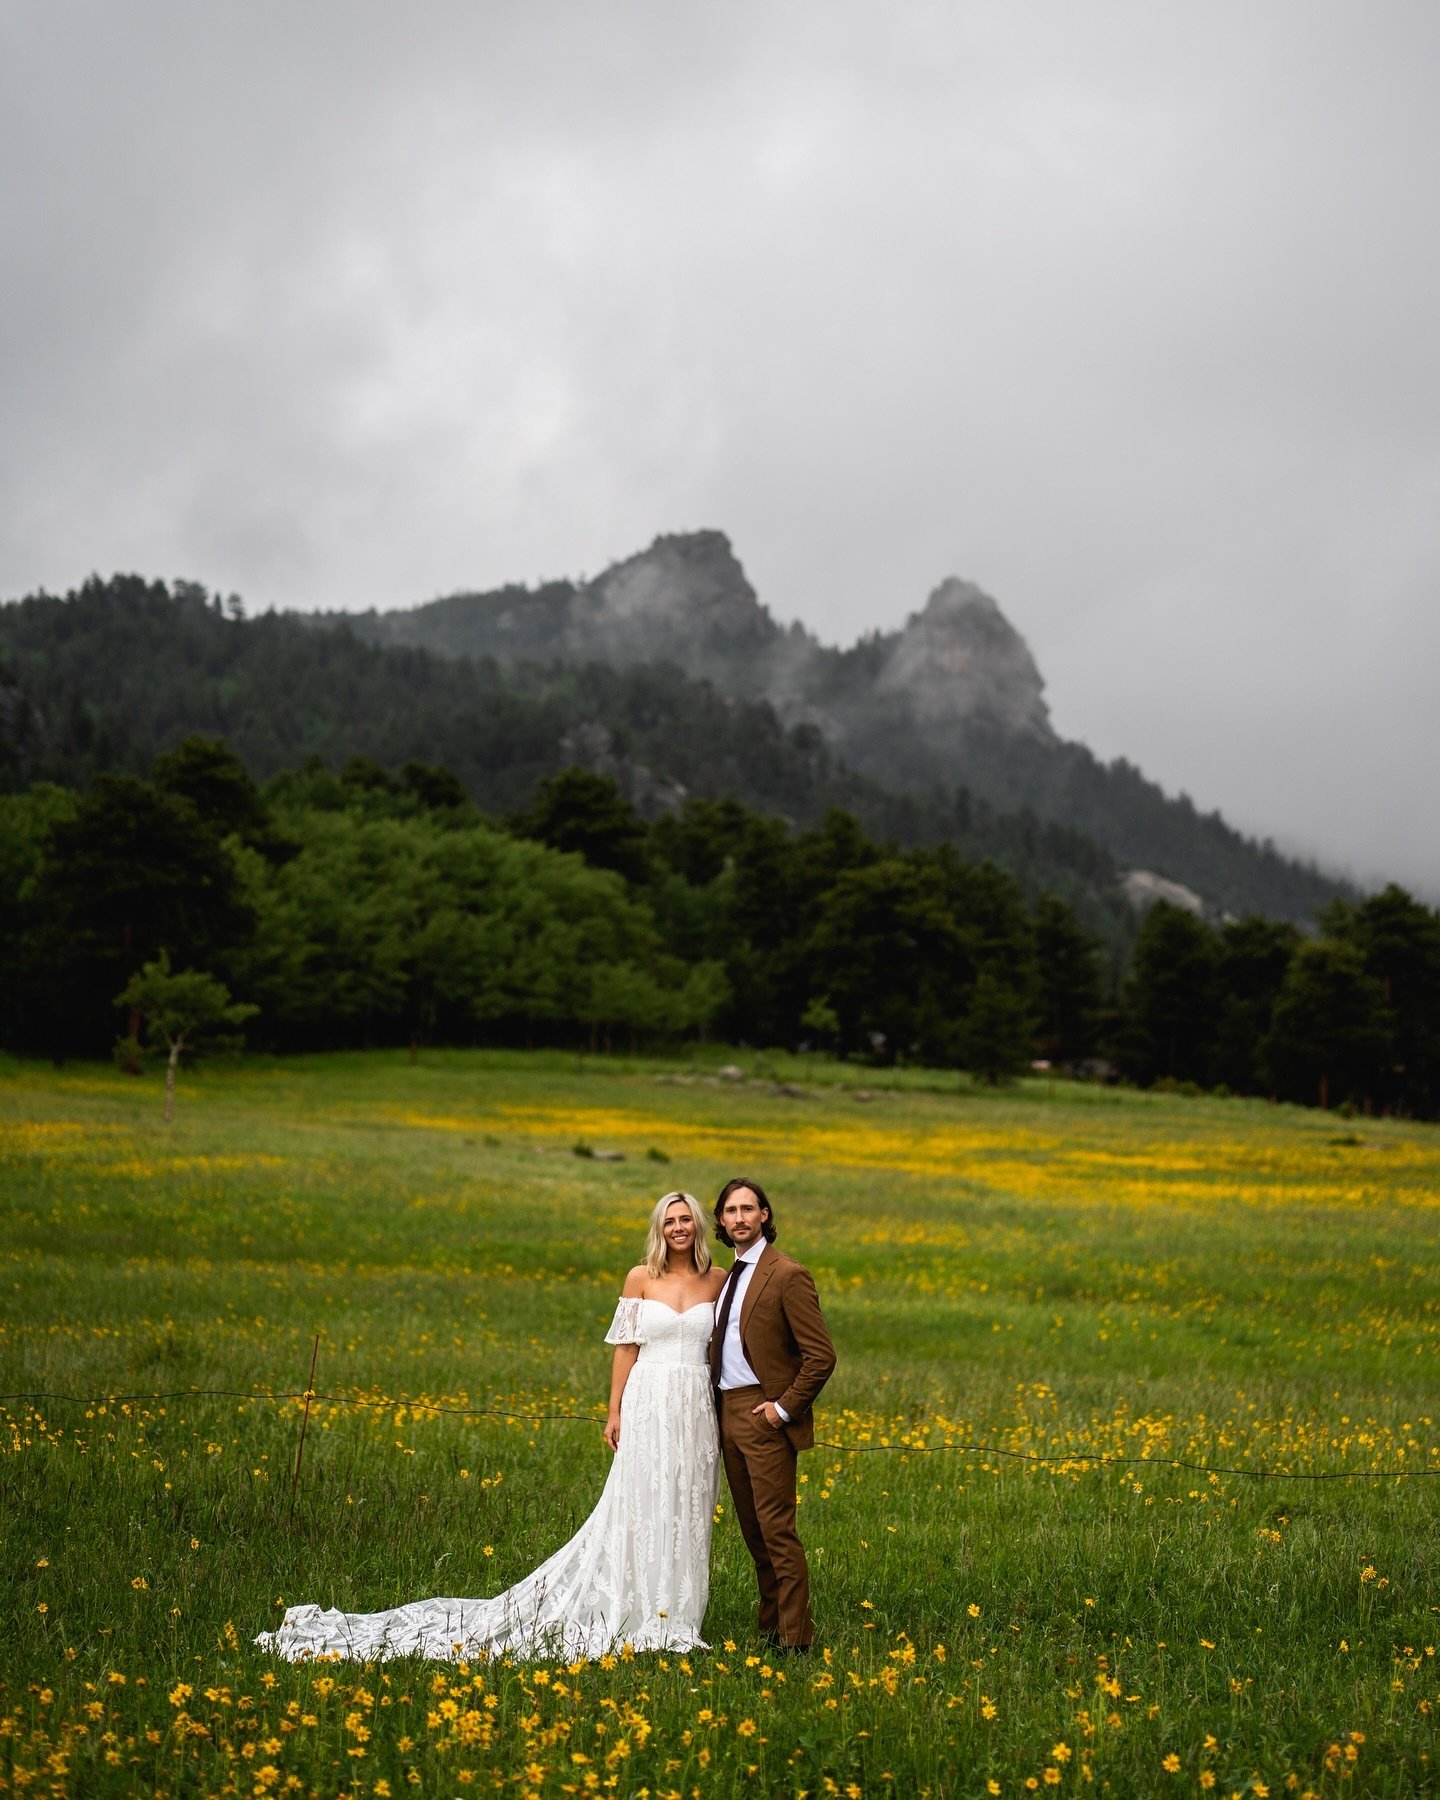 Don&rsquo;t let the rain ruin your day. Get out in it. It&rsquo;s beautiful and your photos can be amazing with those dramatic skies and glistening droplets! 😍

Photography: @wildirismedia
Coordination: @abridesbestmate
Bride: @kaseykostrub
Groom: @